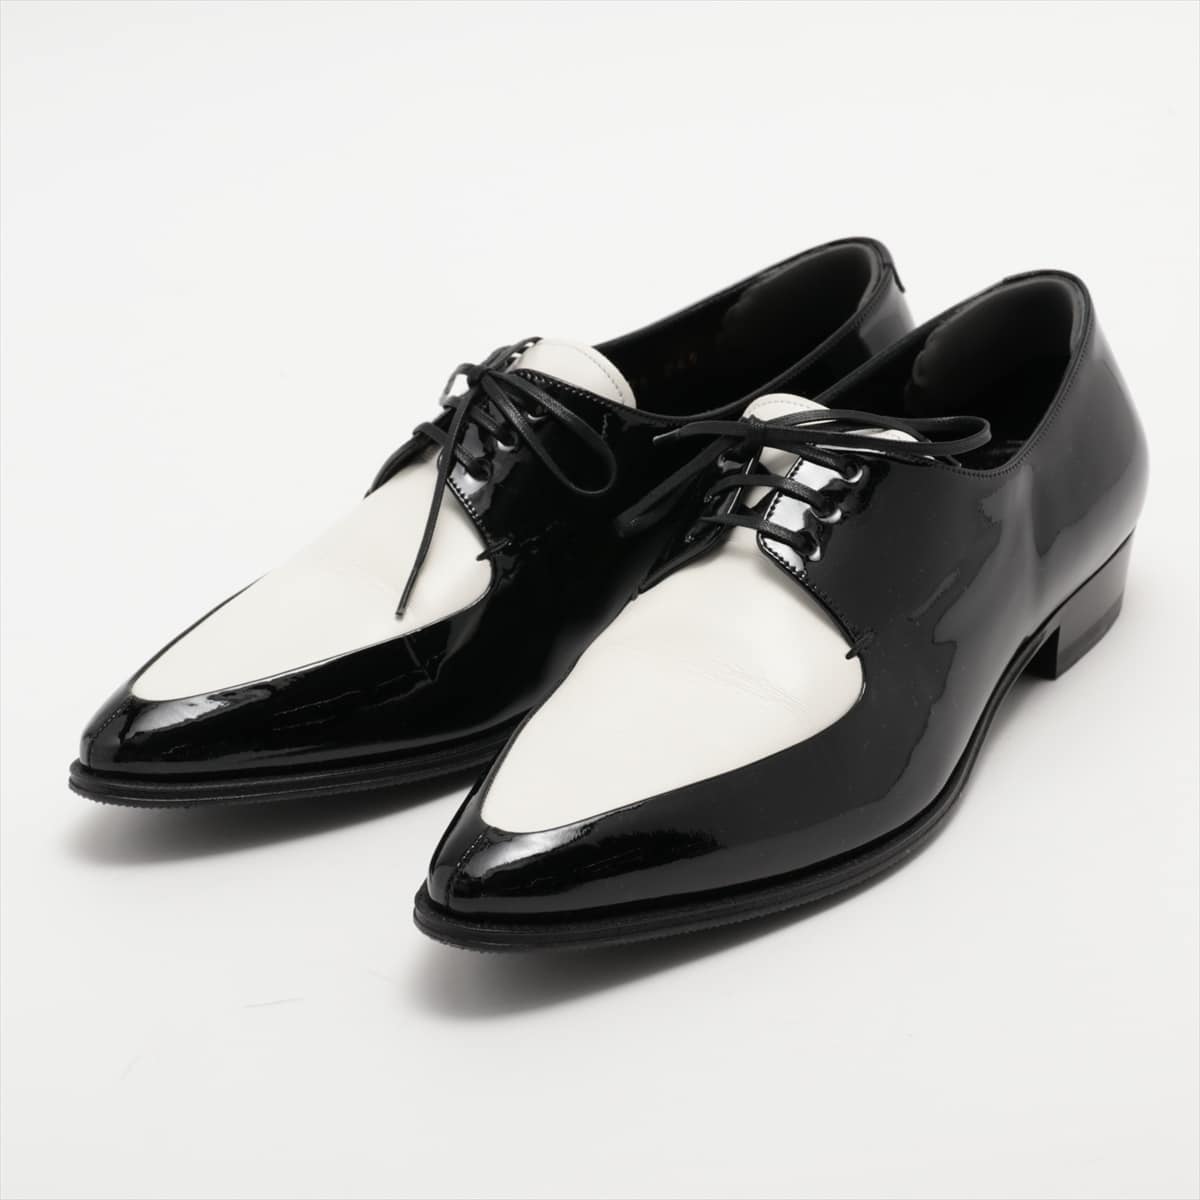 CELINE Patent leather Dress shoes 38 1/2 Ladies' Black × White Lace up Heel padded